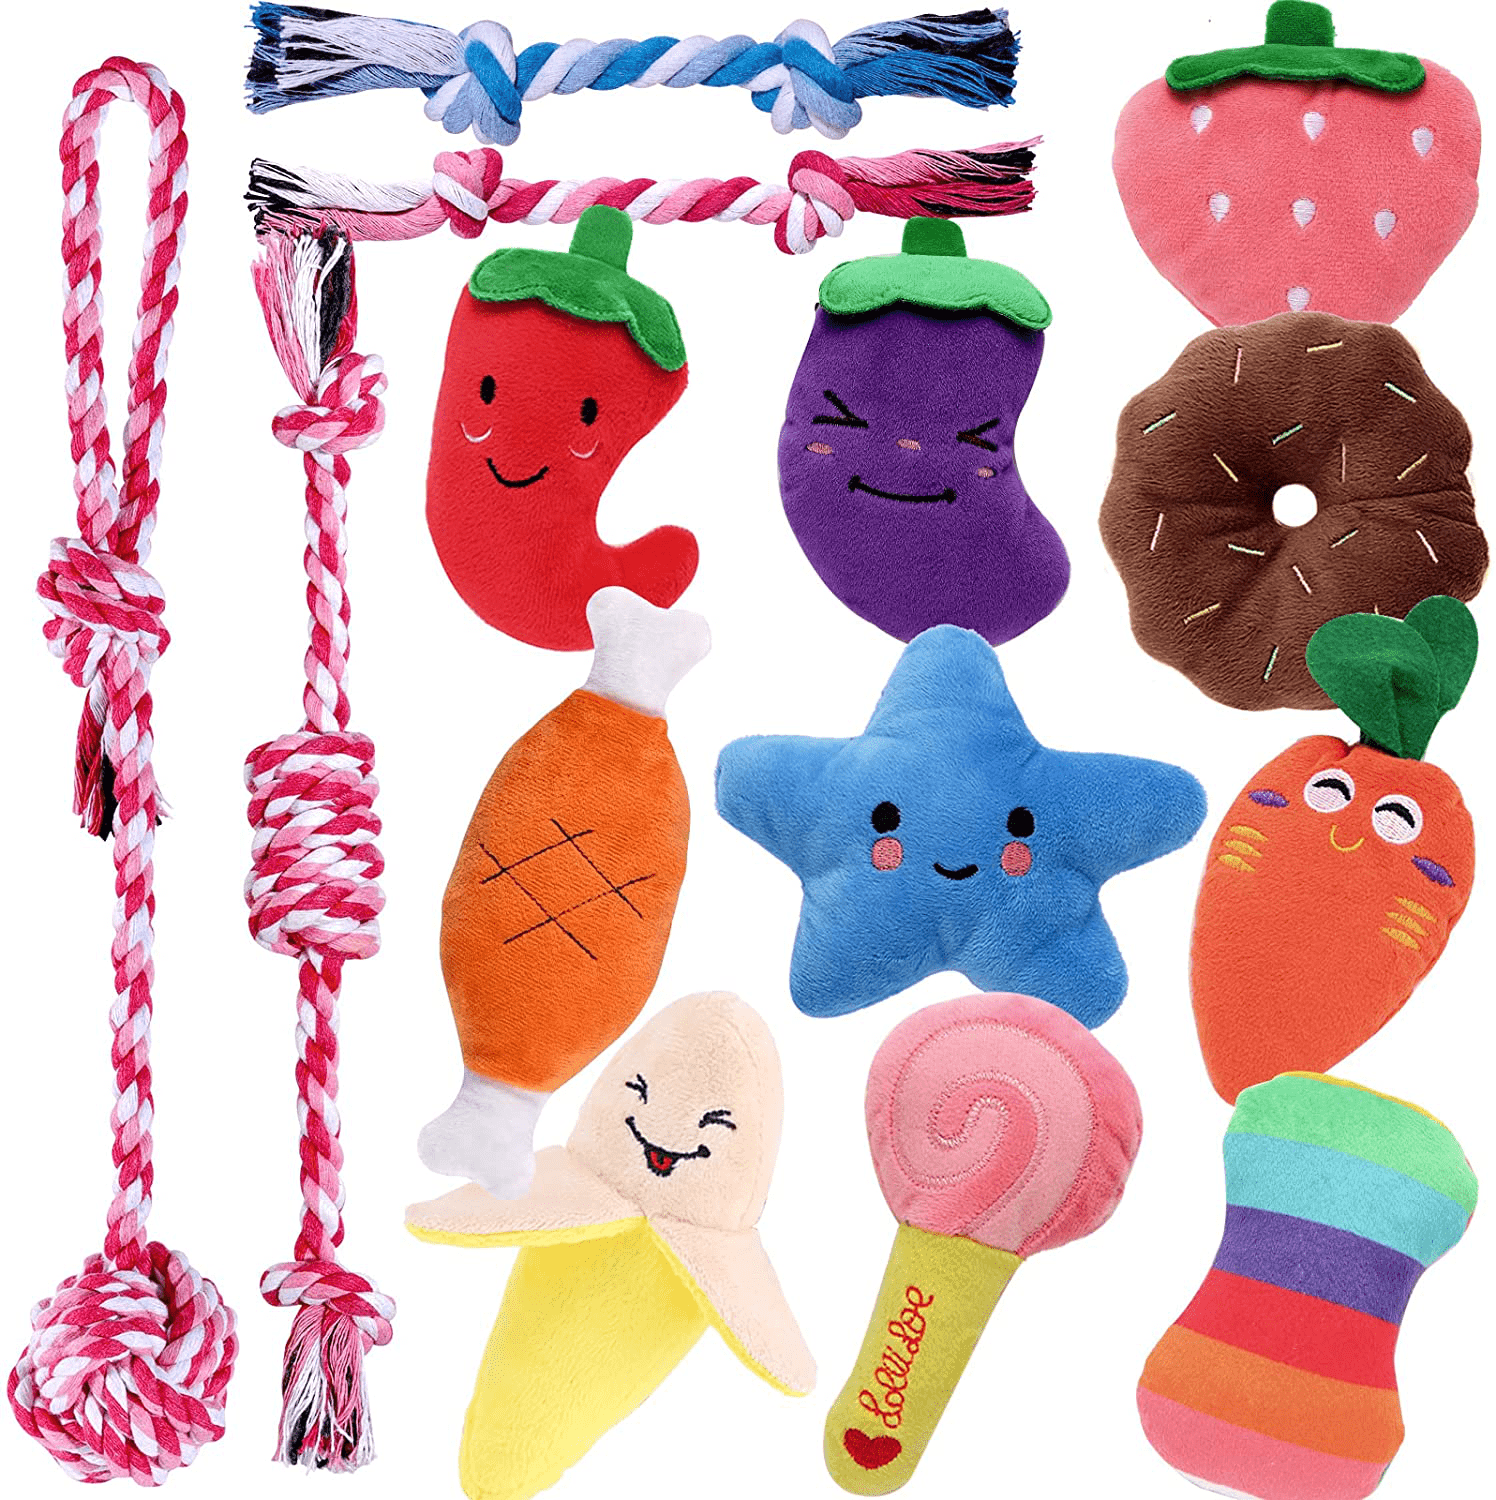 https://kol.pet/cdn/shop/products/8-pack-puppy-toys-squeaky-plush-dog-toys-for-small-dogs-cute-puppy-teething-chew-toy-indestructible-iq-treat-ball-and-safe-ropes-toys-28732713664585_1496x.png?v=1681009914